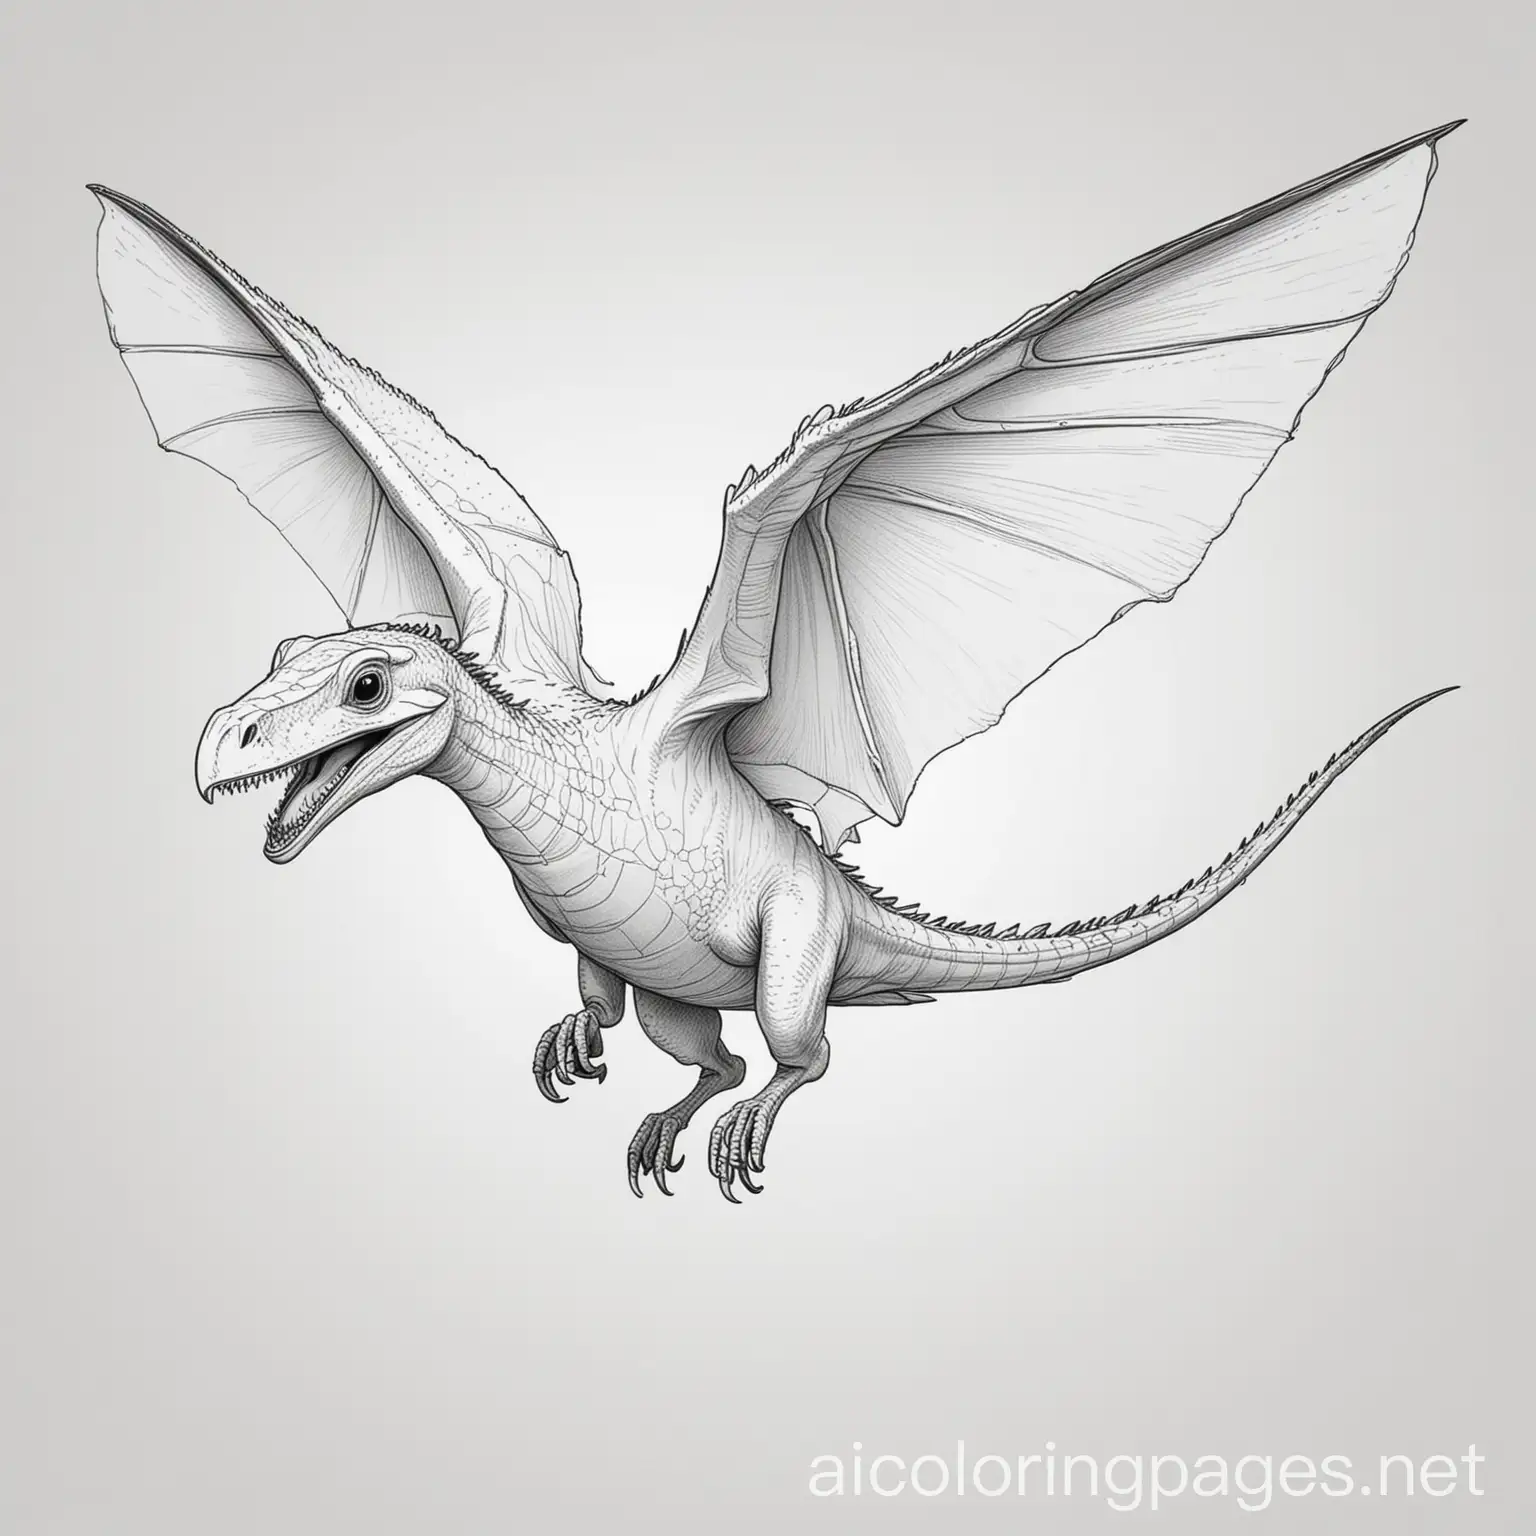 Smiling Pterodactyl with wide wings, Coloring Page, black and white, line art, white background, Simplicity, Ample White Space.